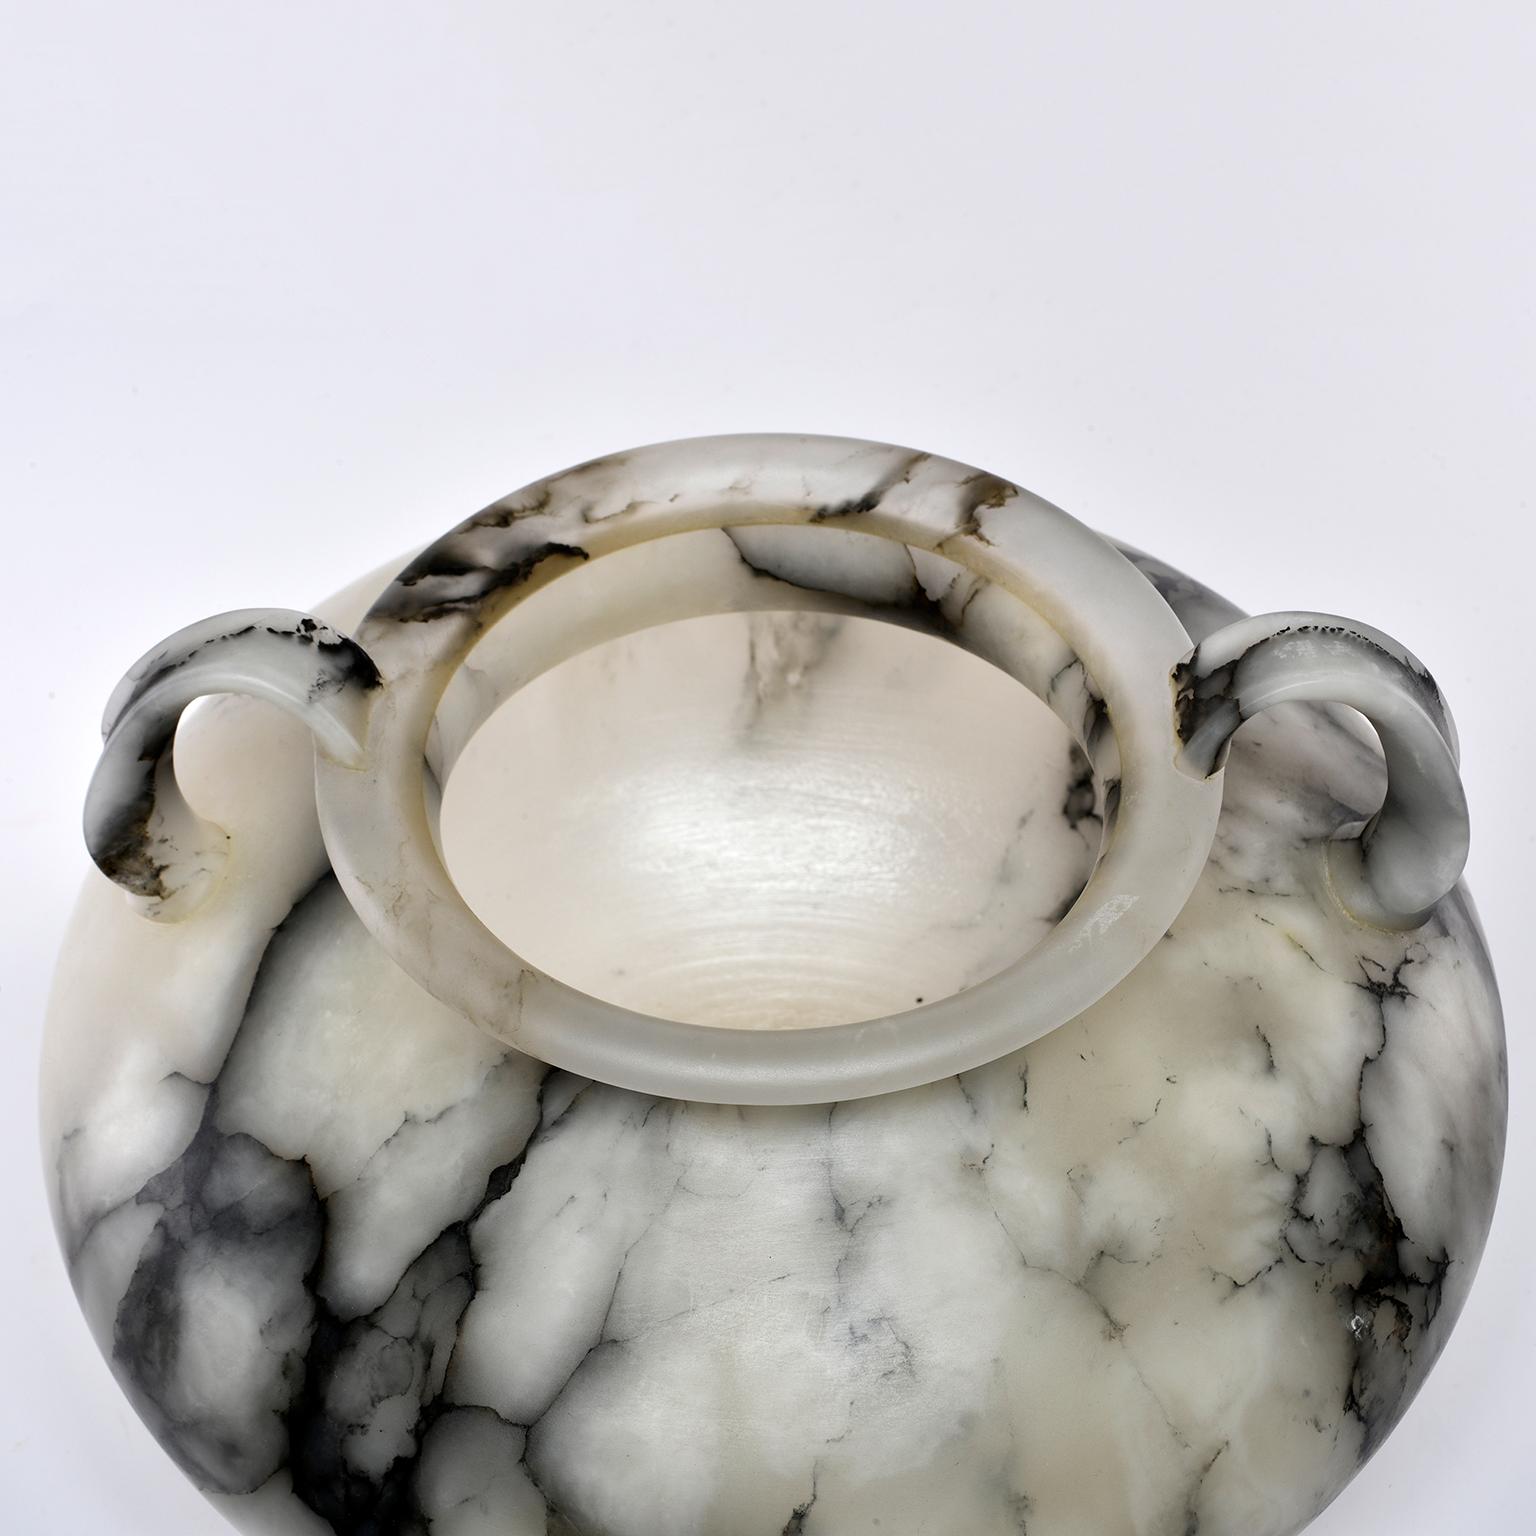 Handmade for us by artisans in Italy, this white alabaster vase features a Classic shape with wide body, narrow neck with handles at the side and rimmed lip. Pale alabaster features dramatic contrasting dark gray veining. New, no flaws found.